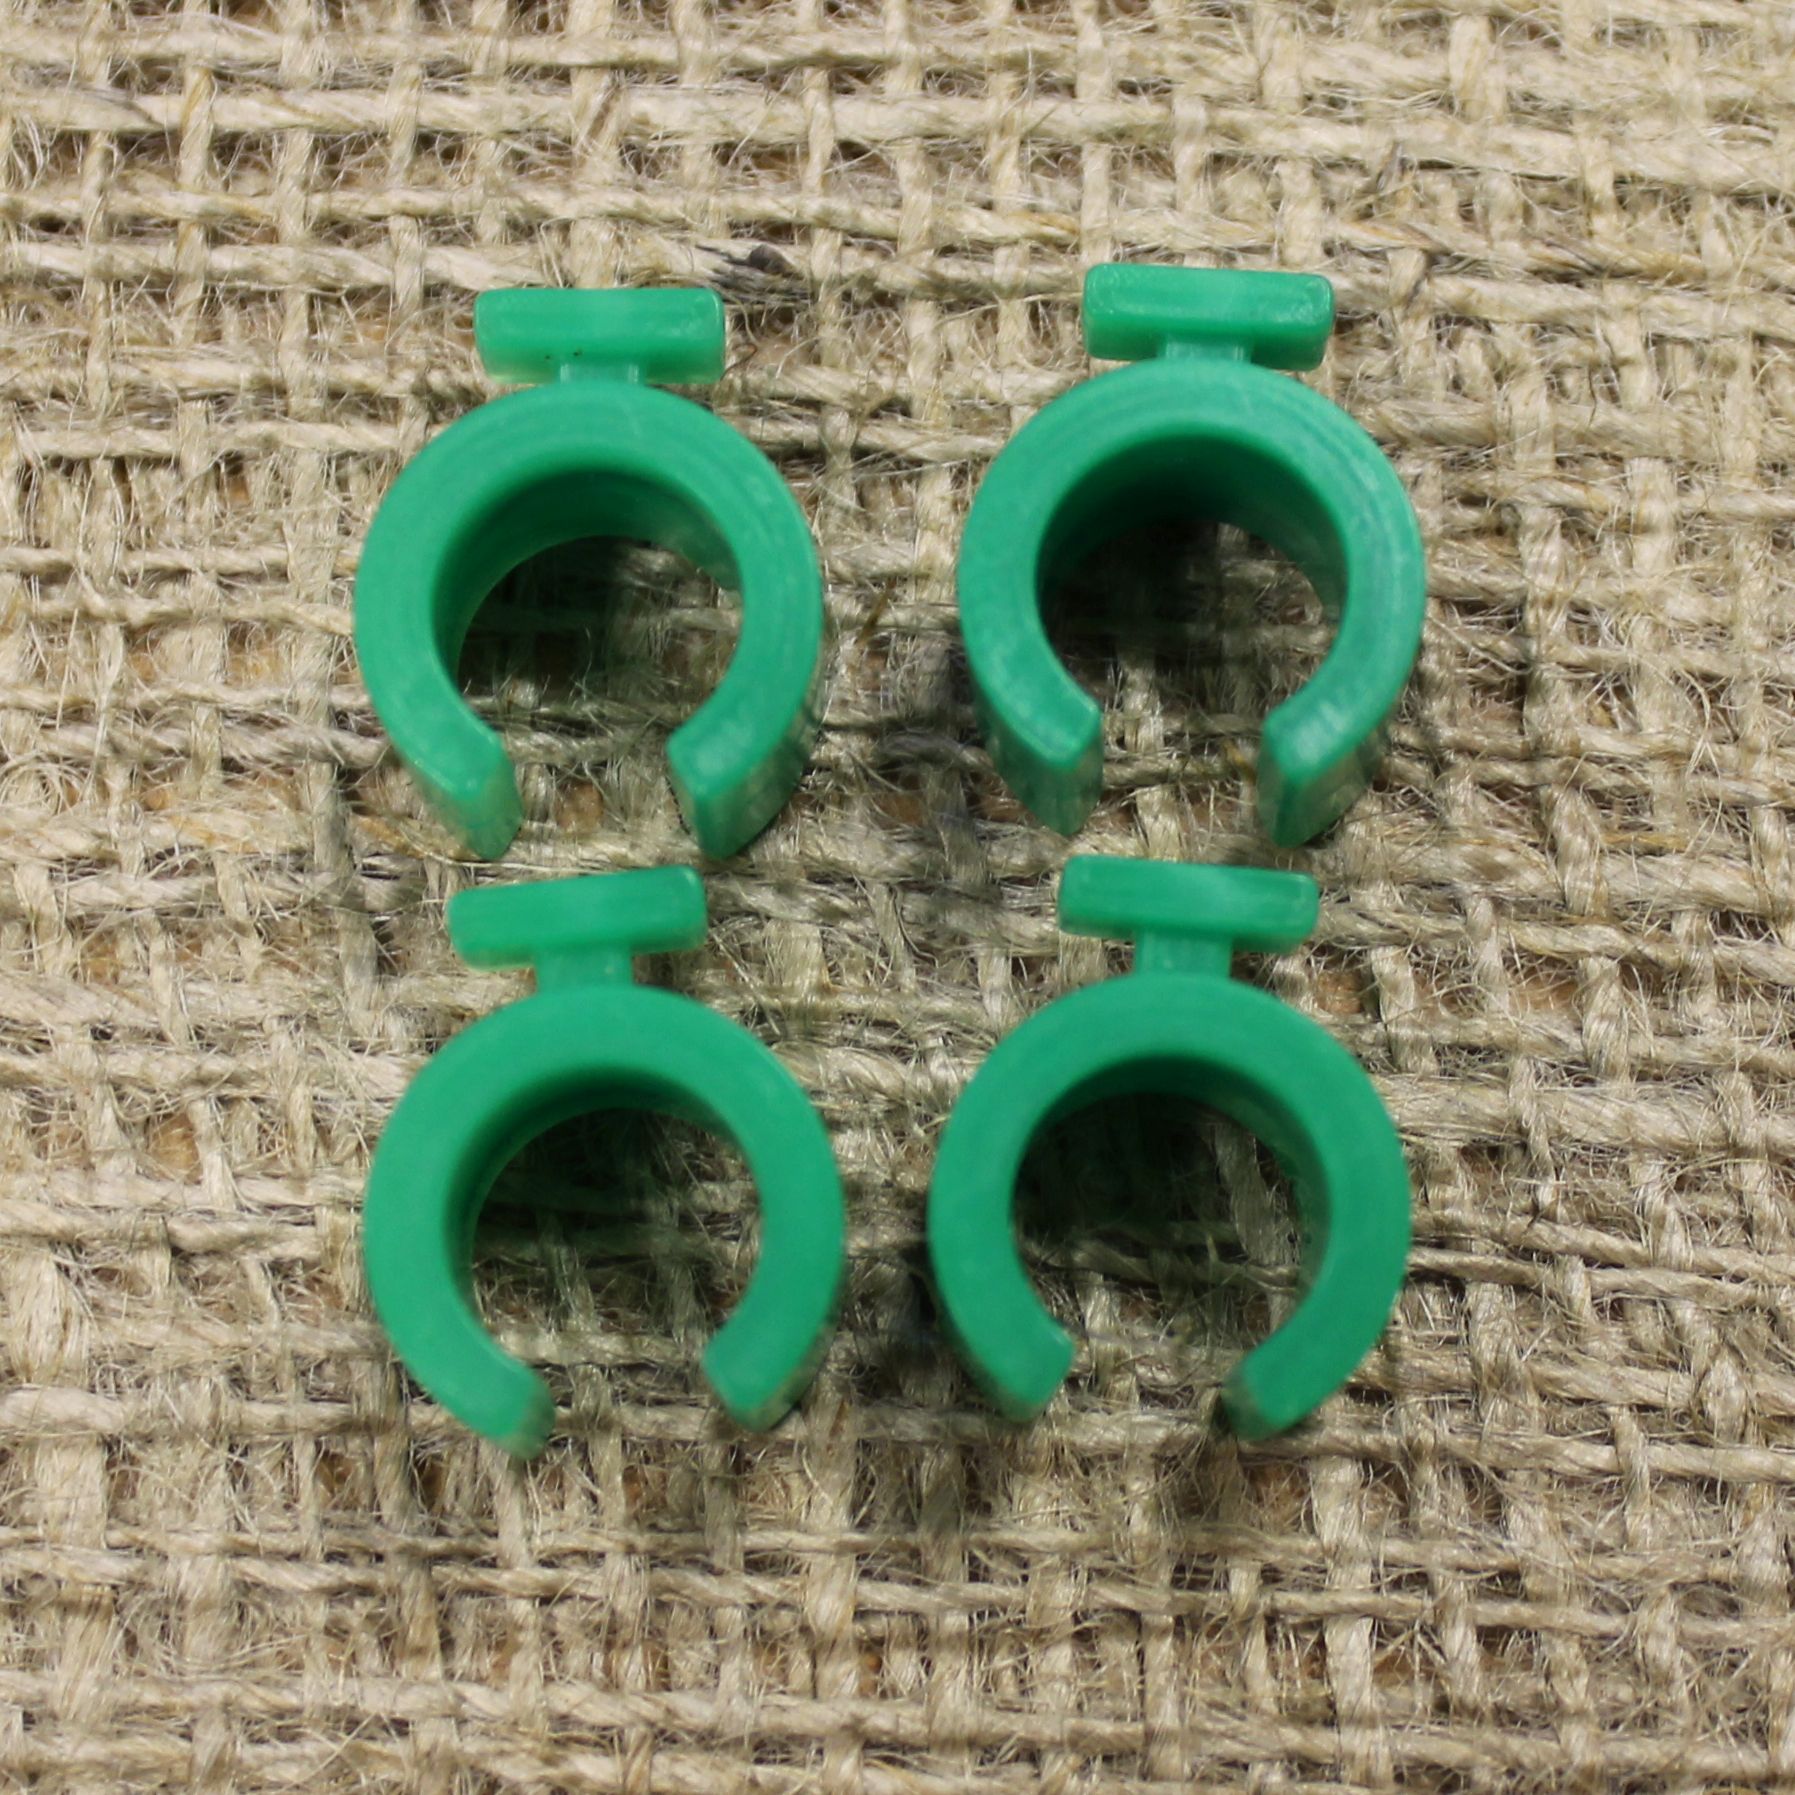 10mm C Clips (1000)